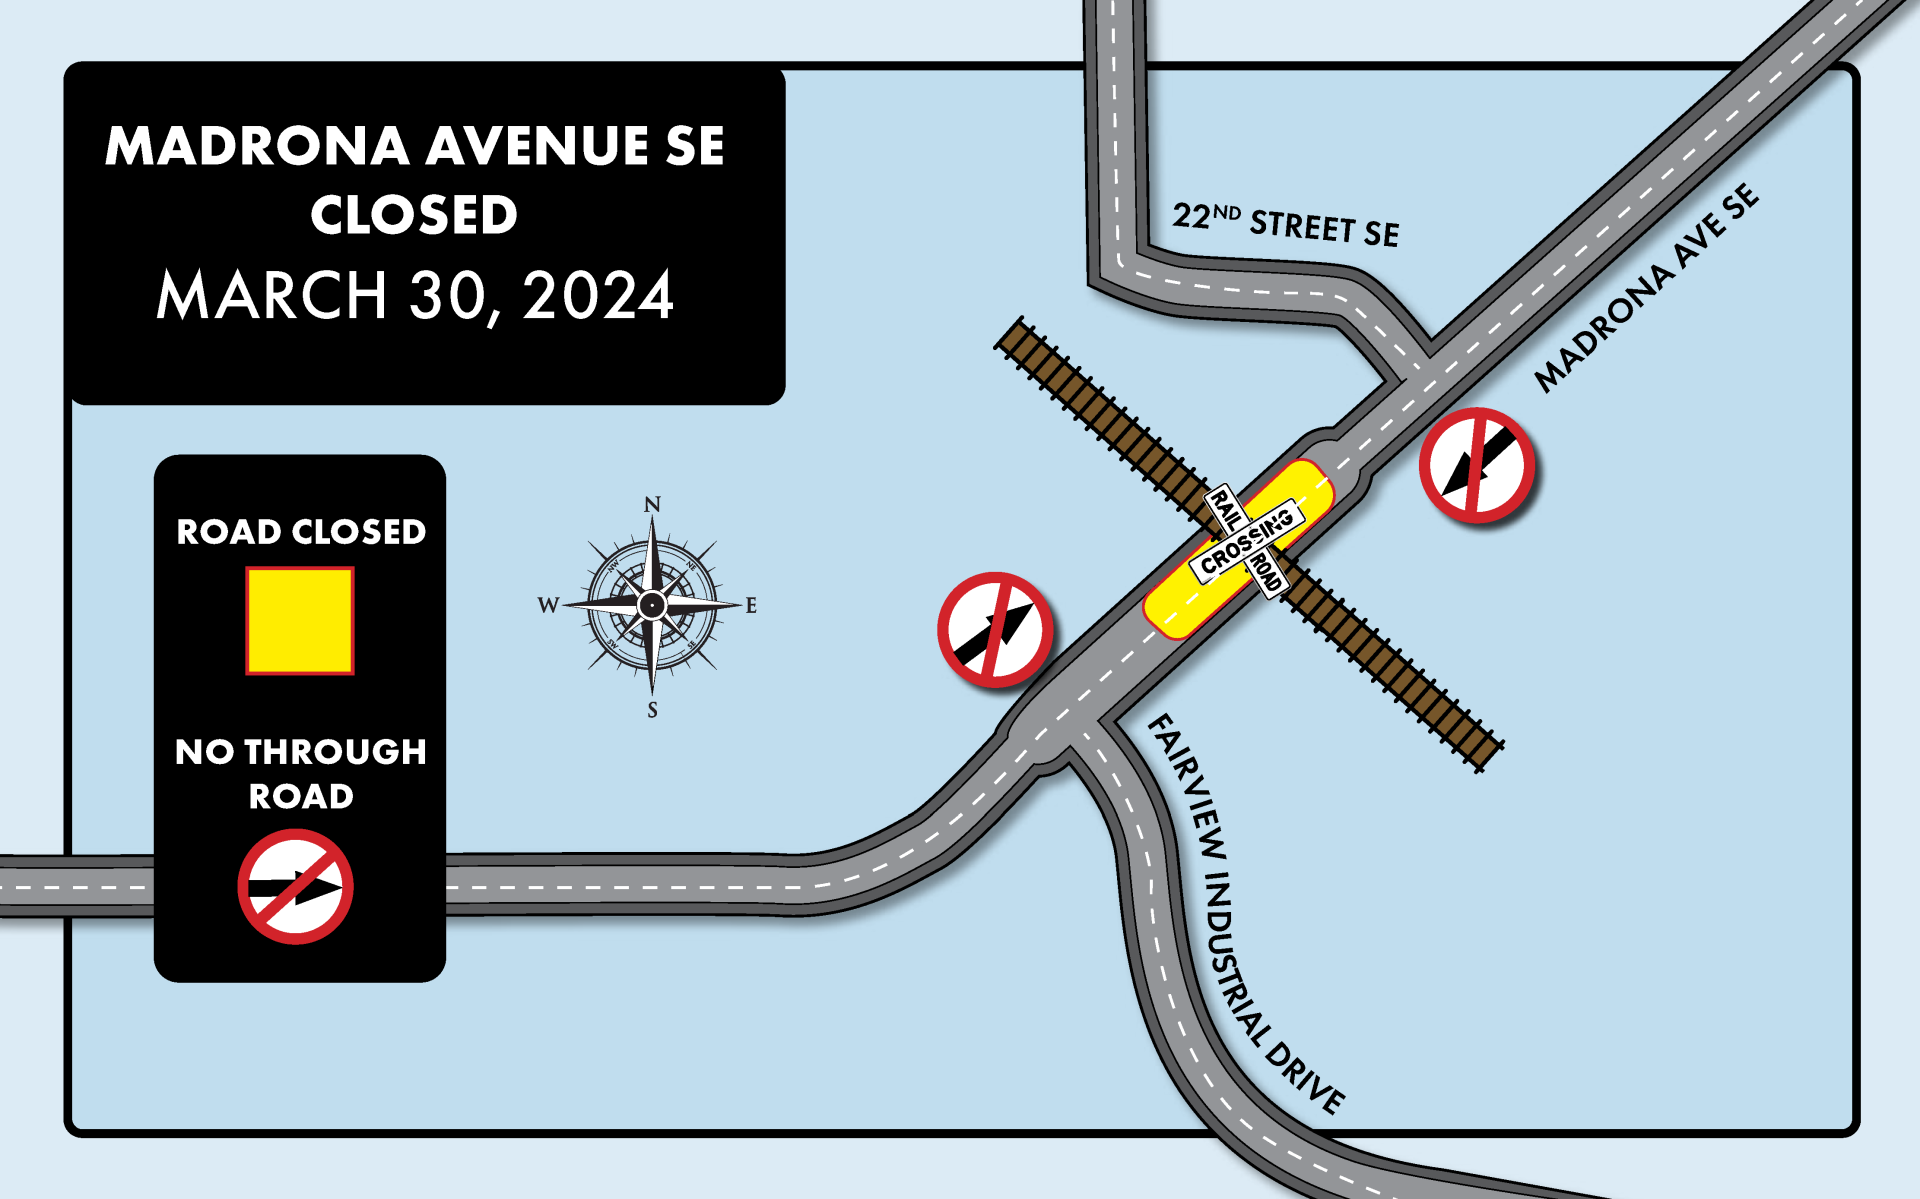 Traffic Alert: Madrona Avenue SE to Close Between 22nd Street SE and Fairview Industrial Drive SE on March 30, 2024